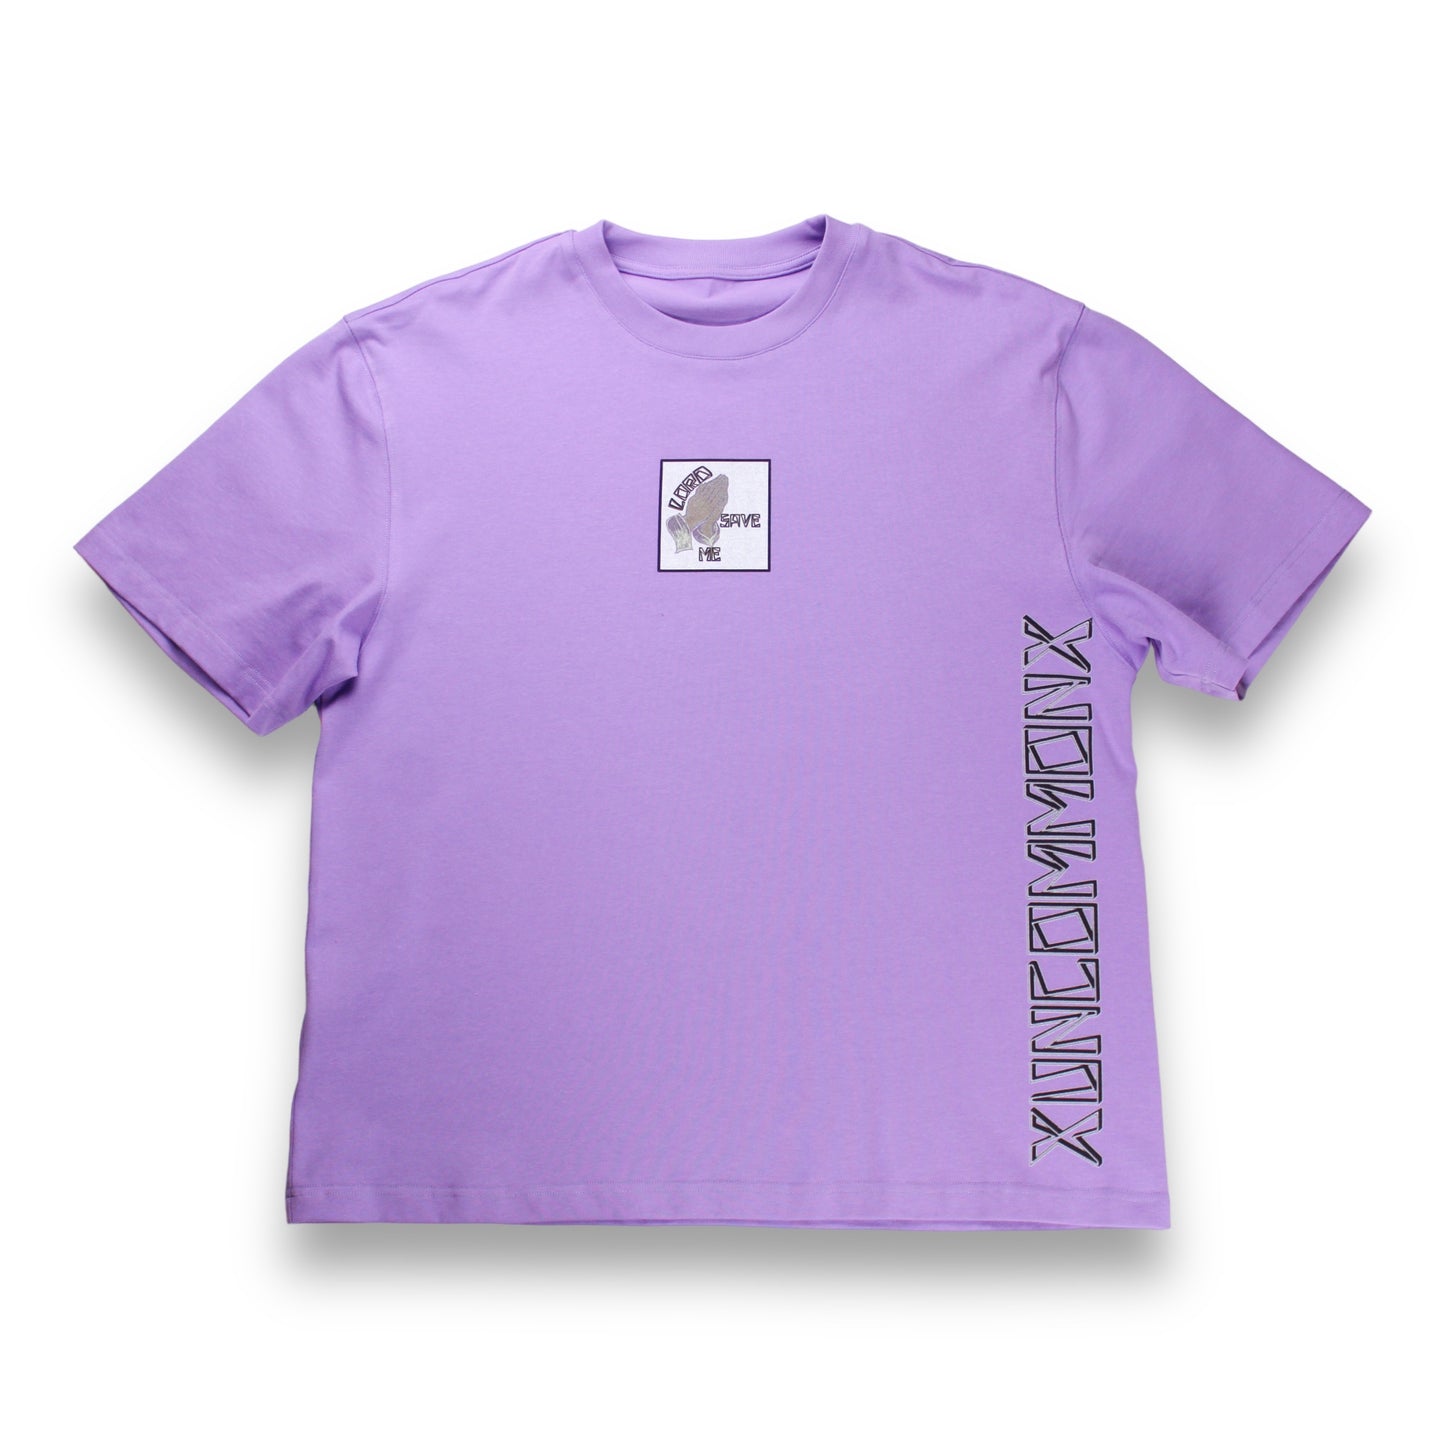 'Lord Save Me' S/S T-Shirt Lavender